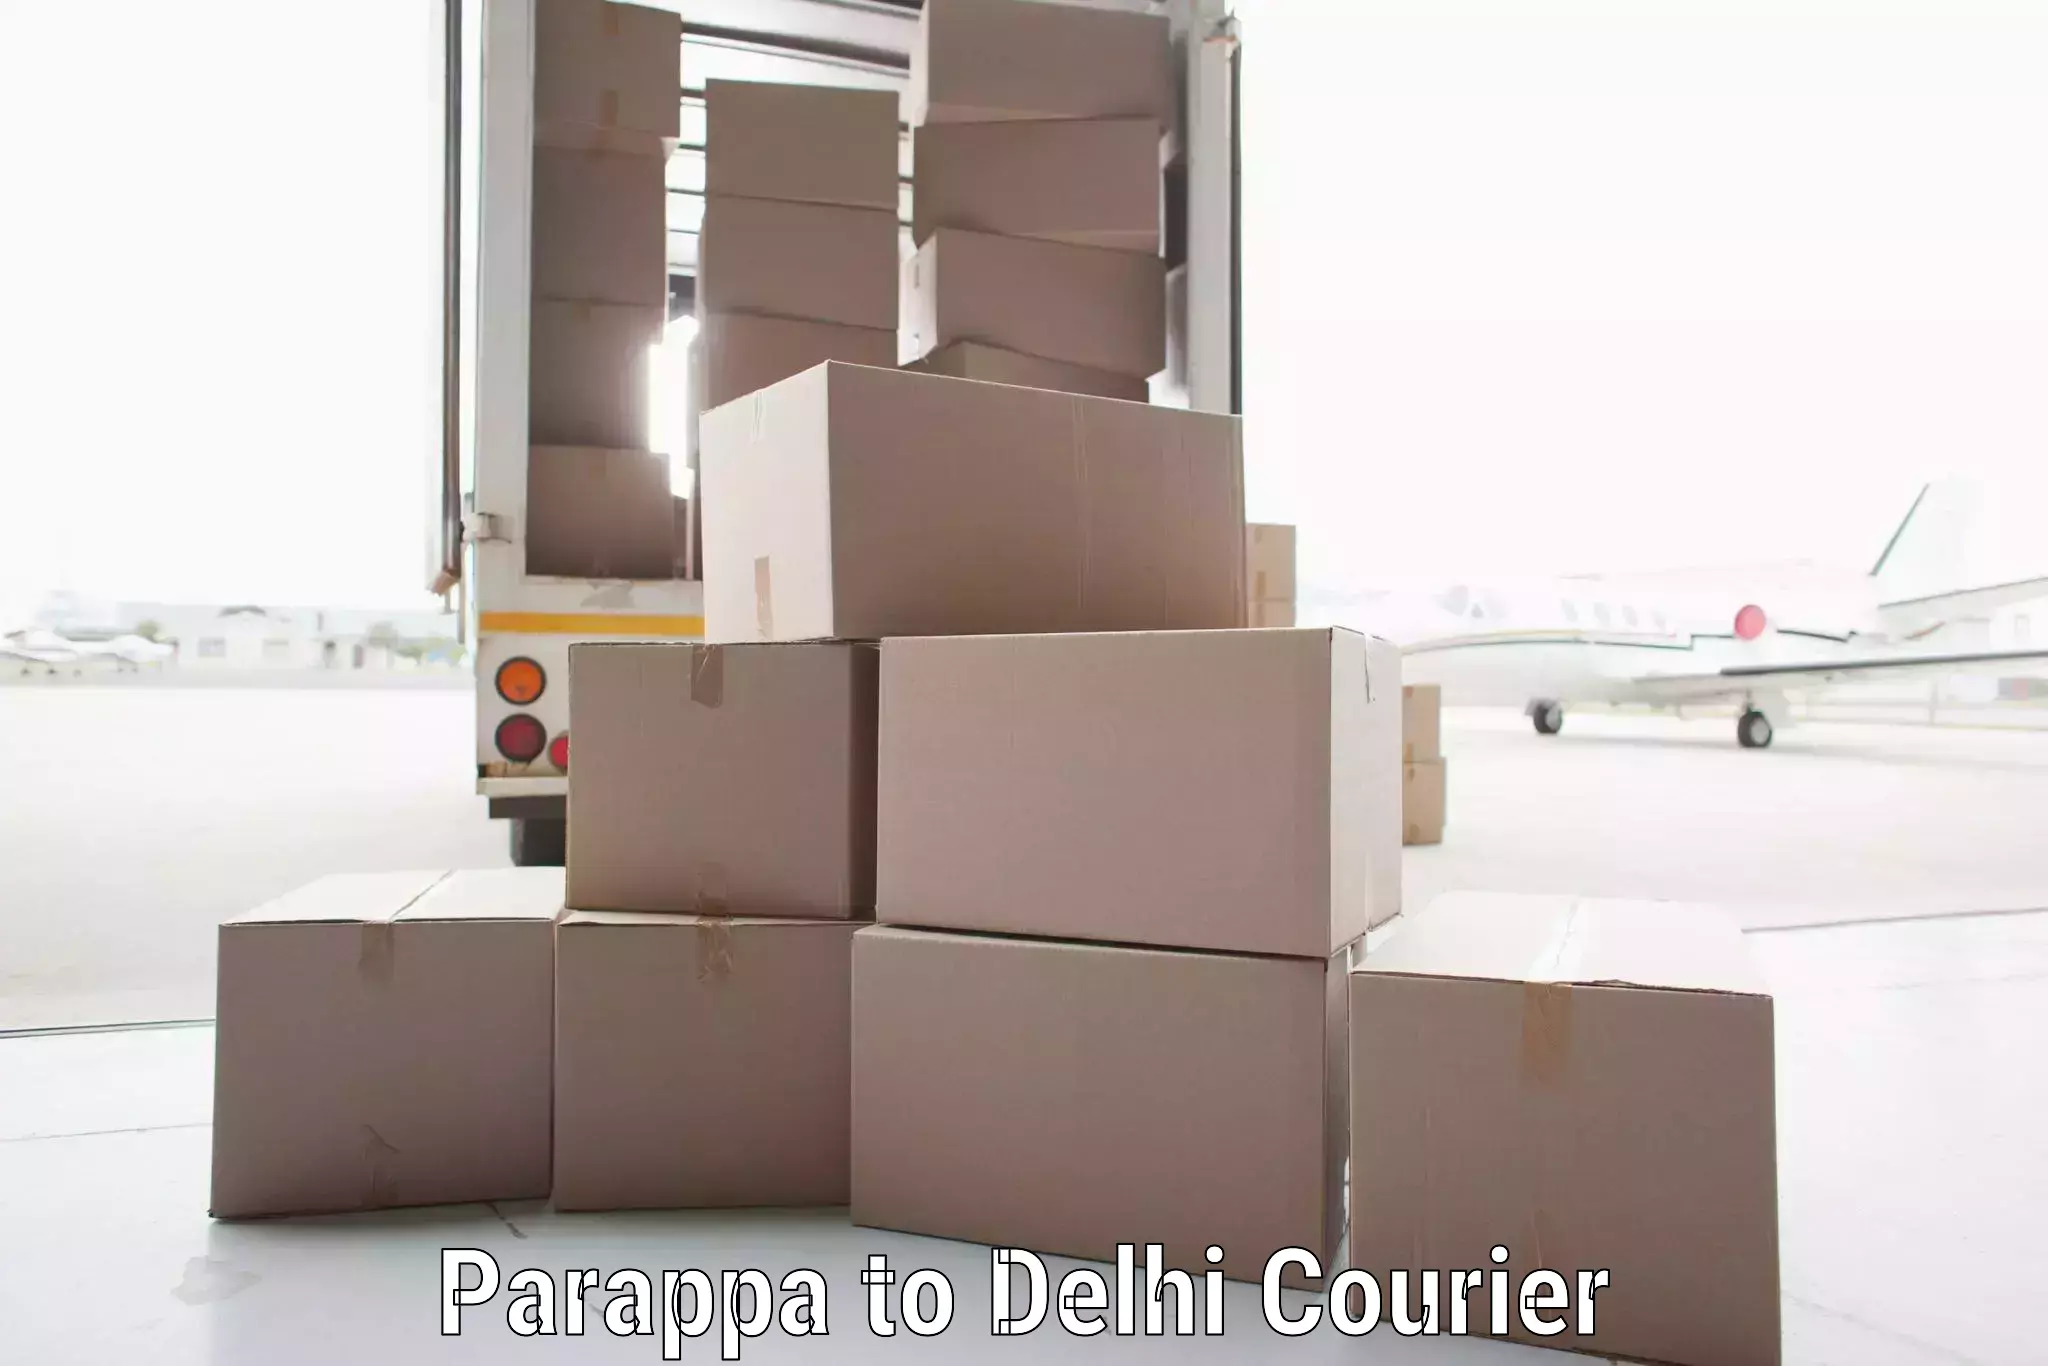 International courier rates Parappa to Delhi